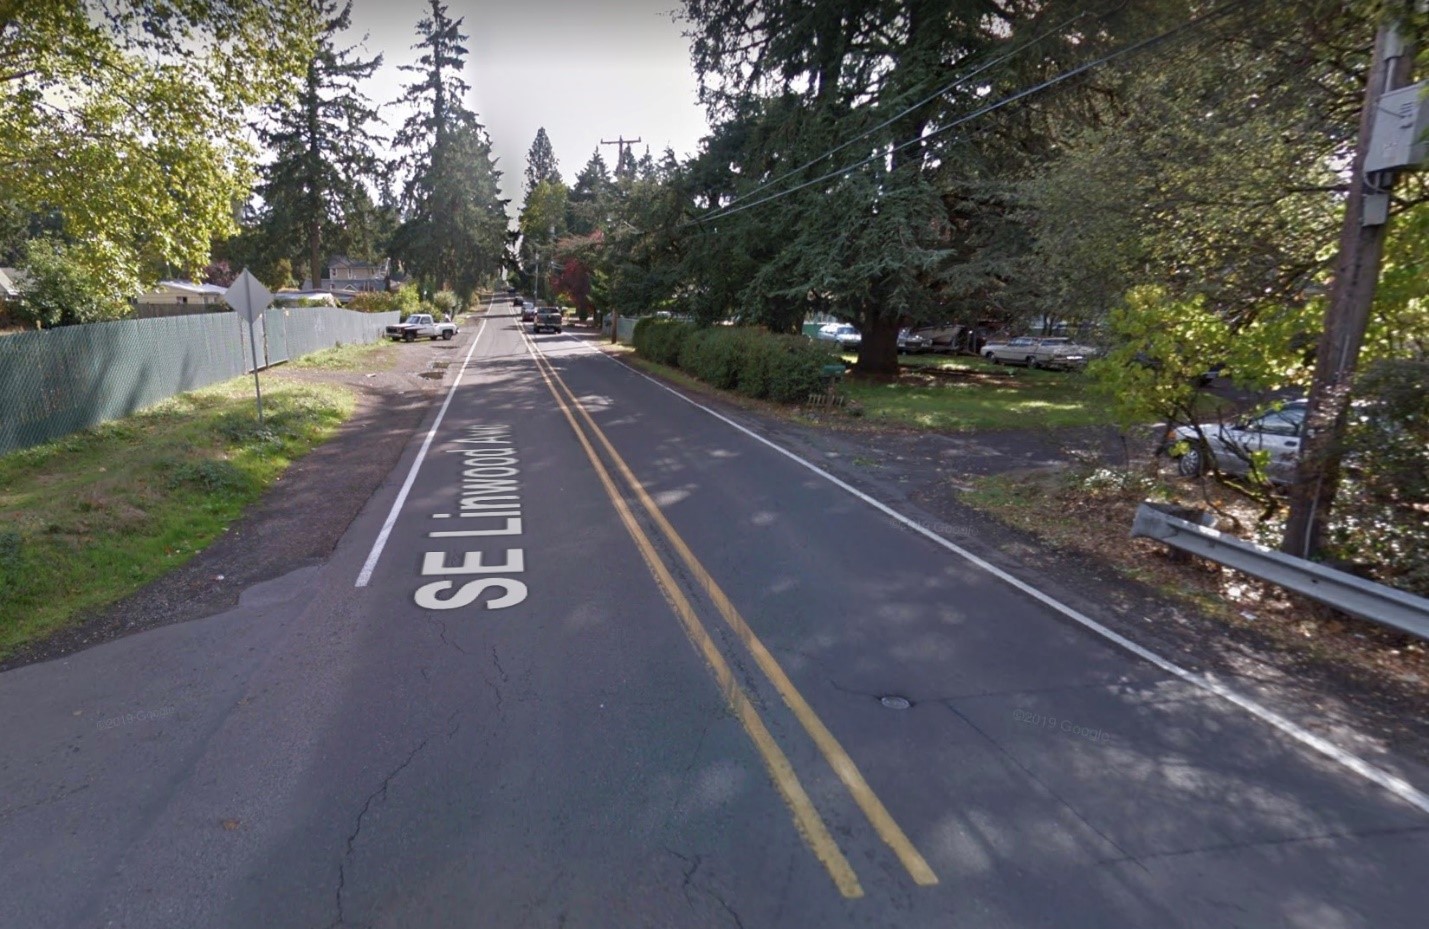 A typical section of SE Linwood in 2020 with no bike paths or sidewalks